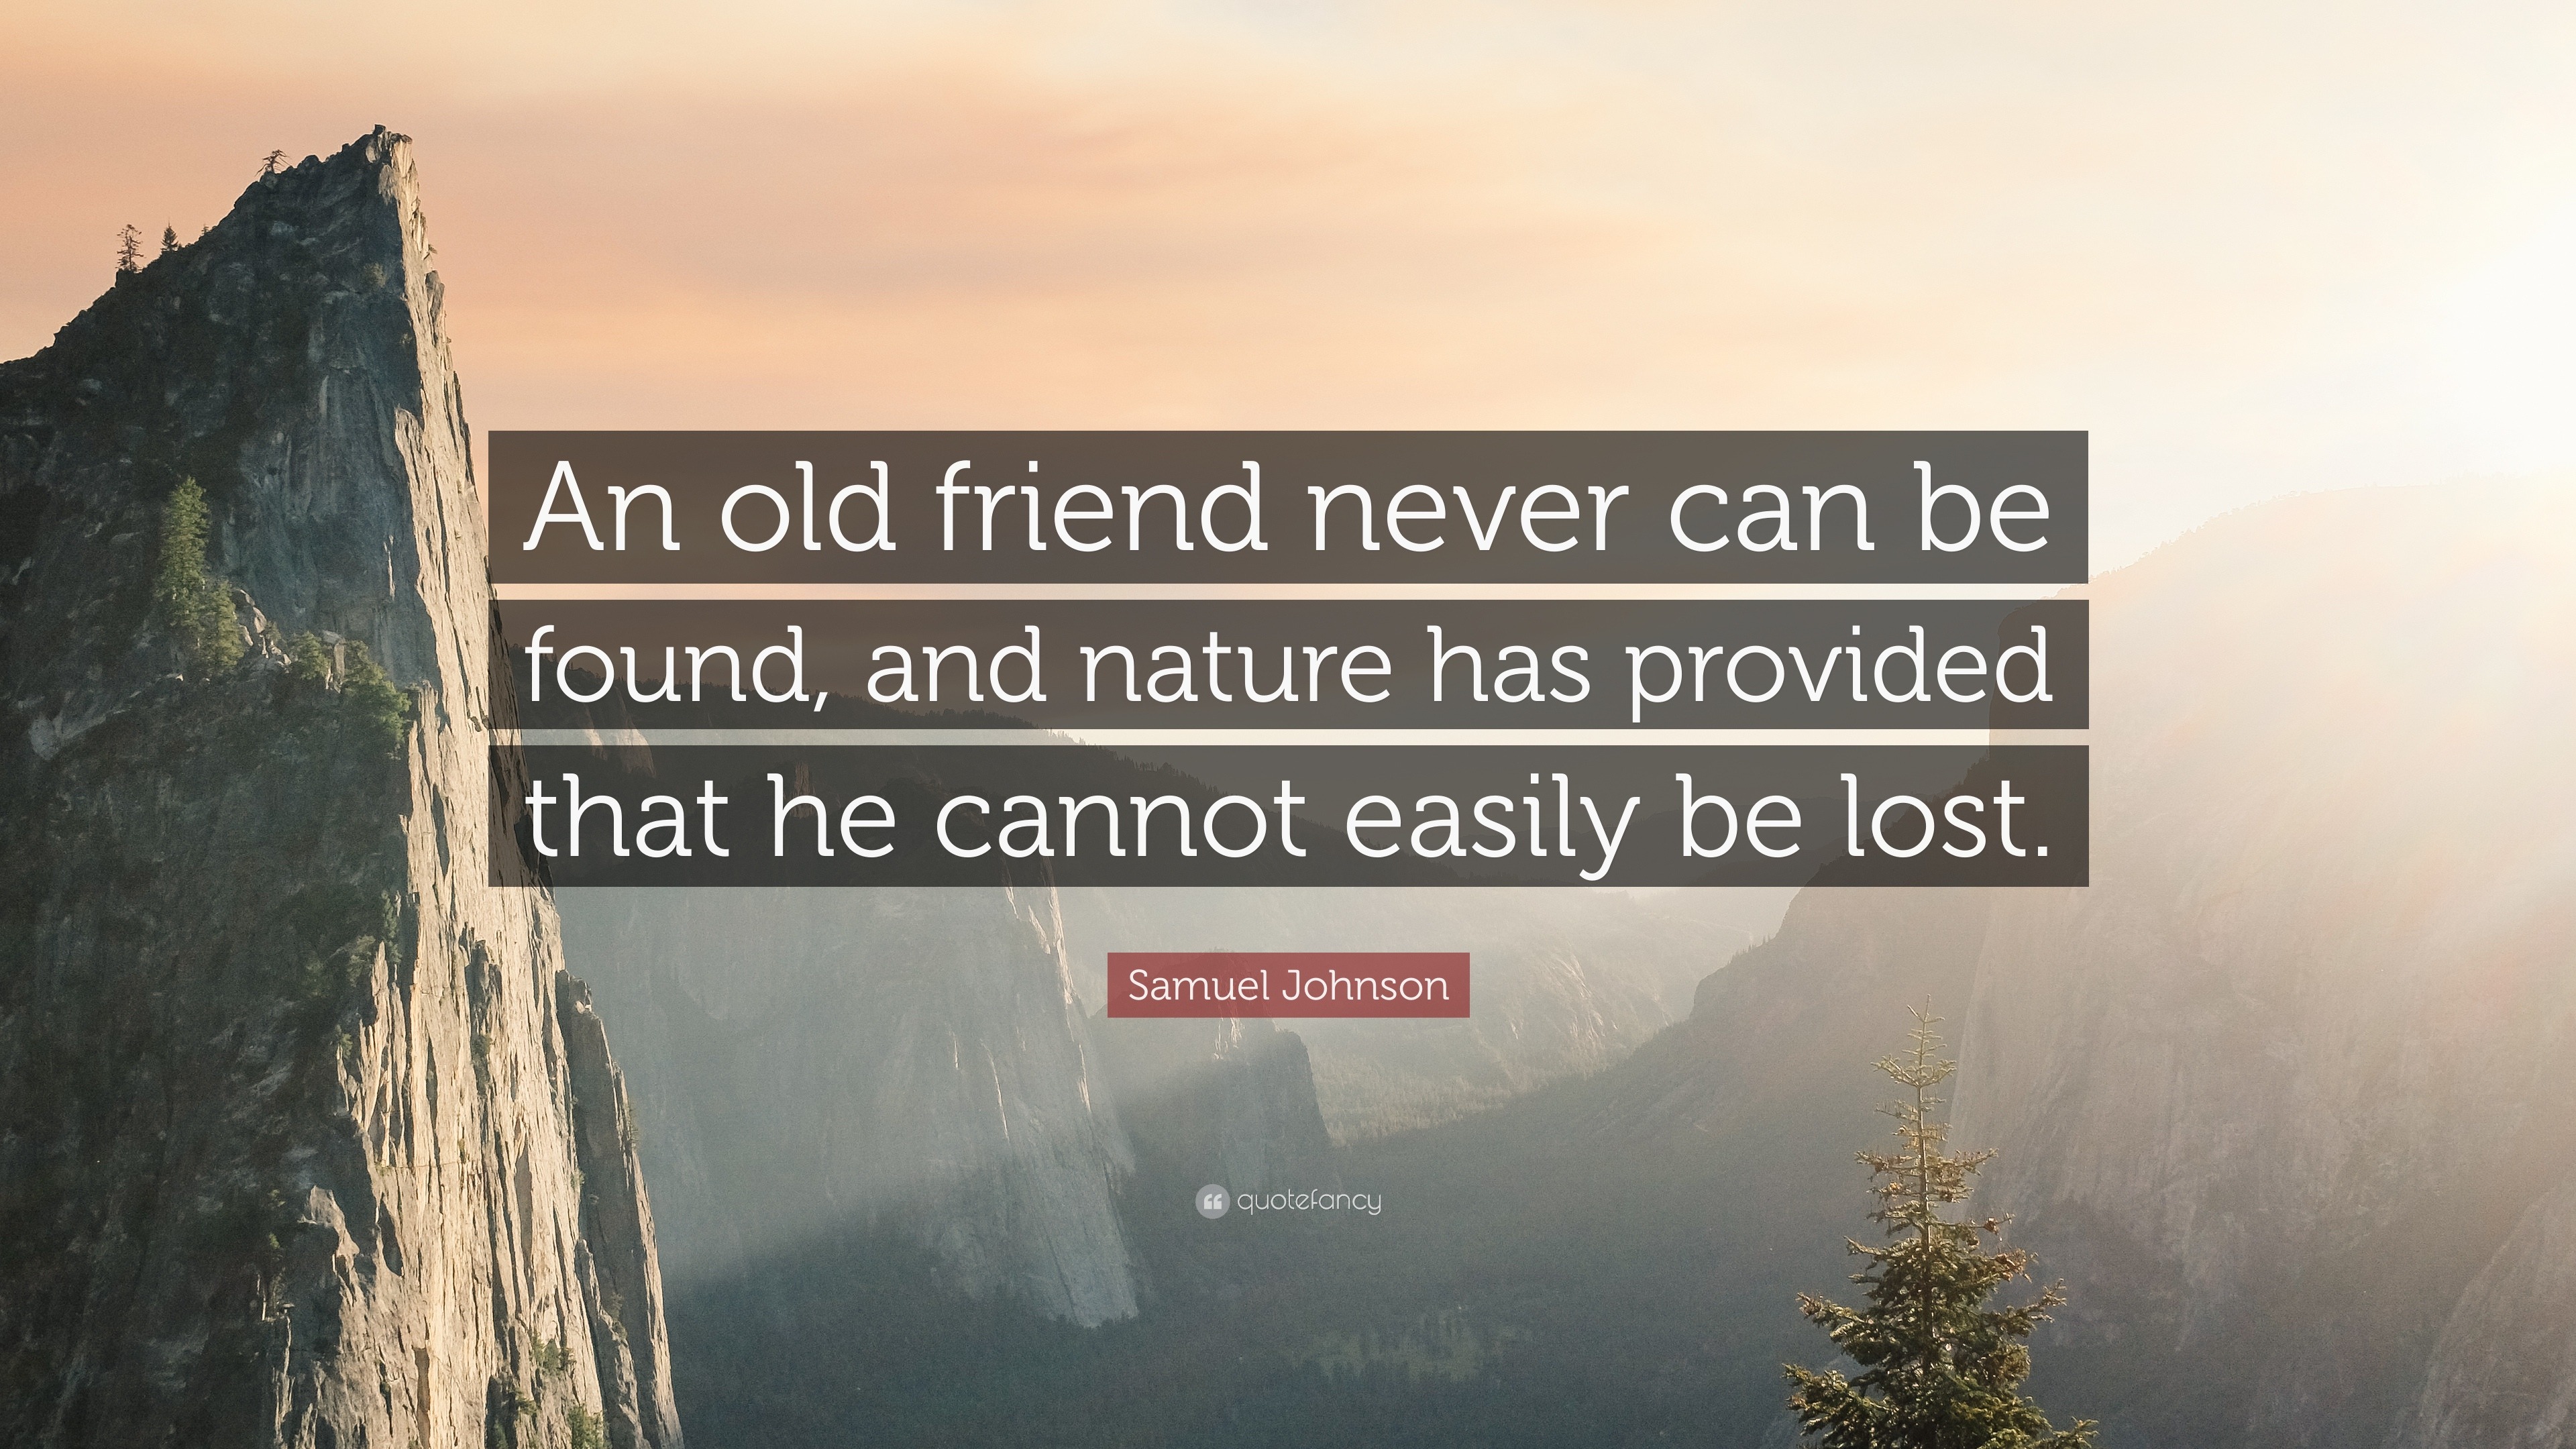 Samuel Johnson Quote: “An old friend never can be found, and nature has ...